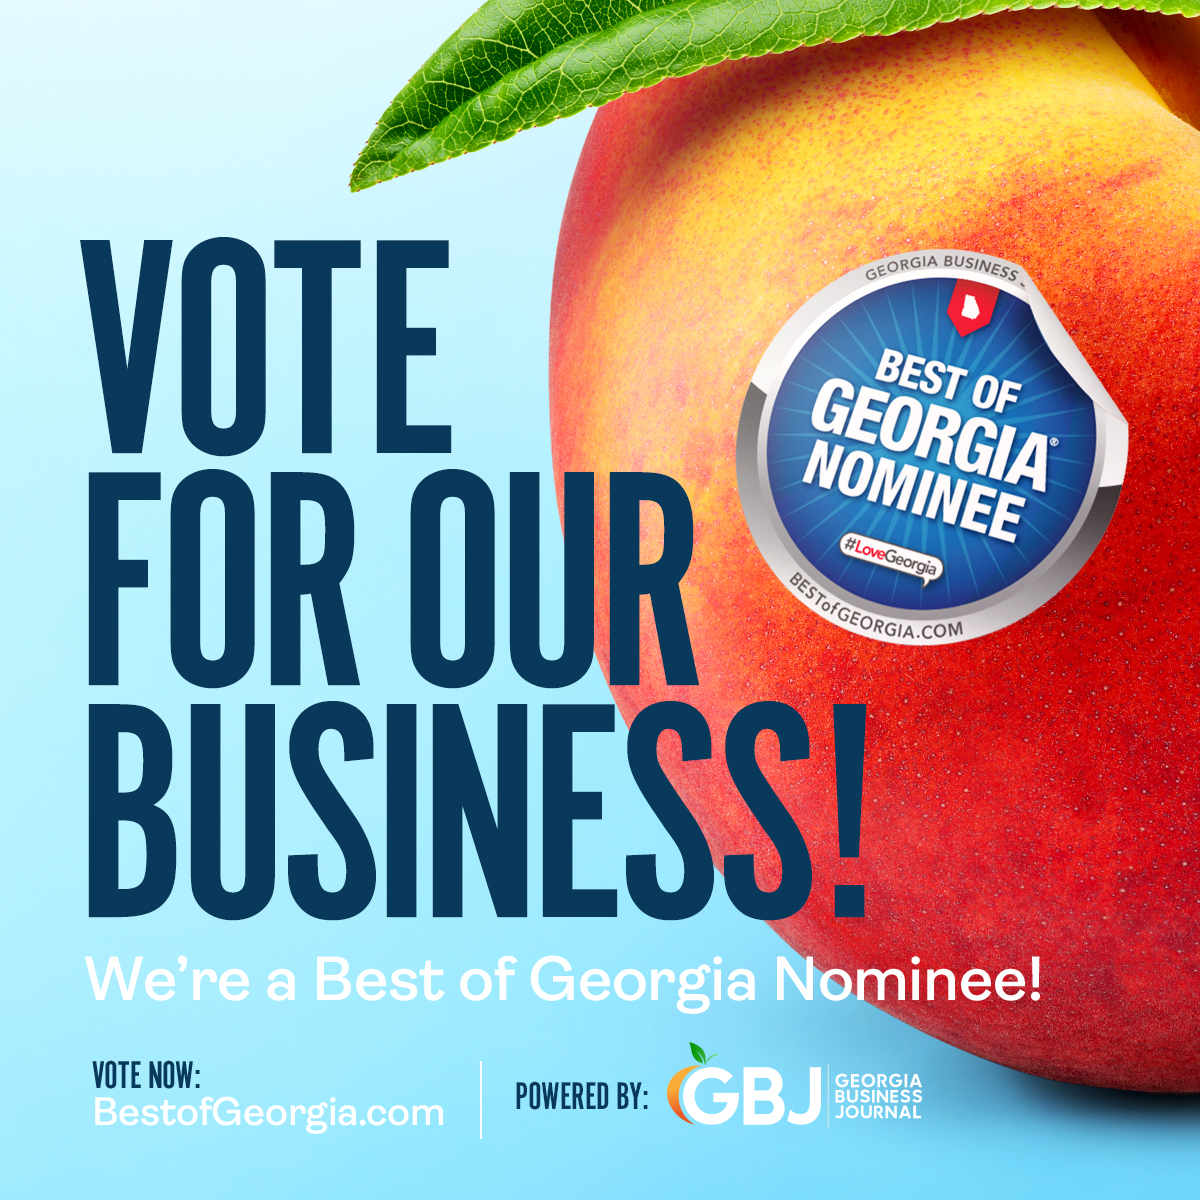 We are proud to announce that we have been nominated for #BESTofGEORGIA! Help us win by voting for us at tinyurl.com/2dalyg65! You can vote daily! Thank you!